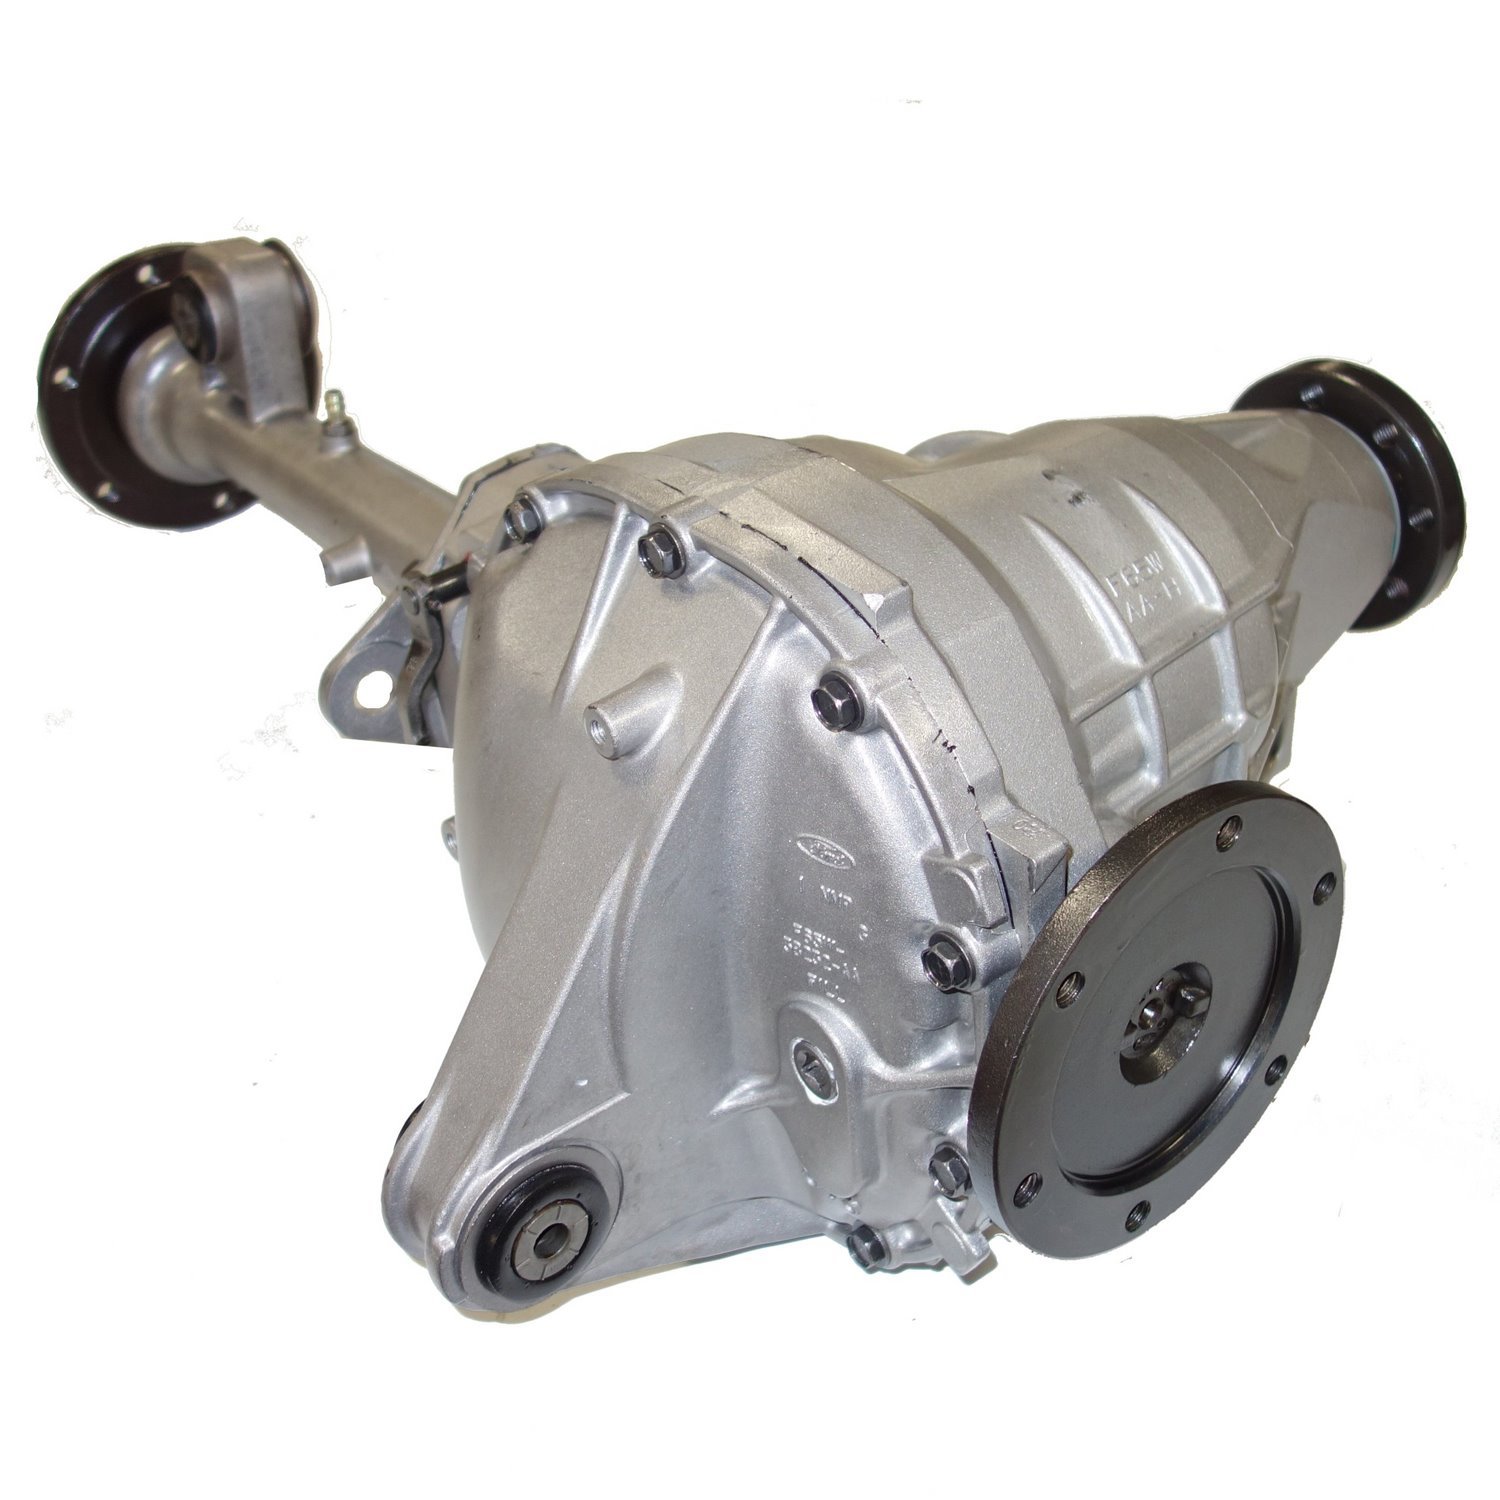 Remanufactured Axle Assembly for Ford 8.8 IFS 97-04 Ford F150 3.31